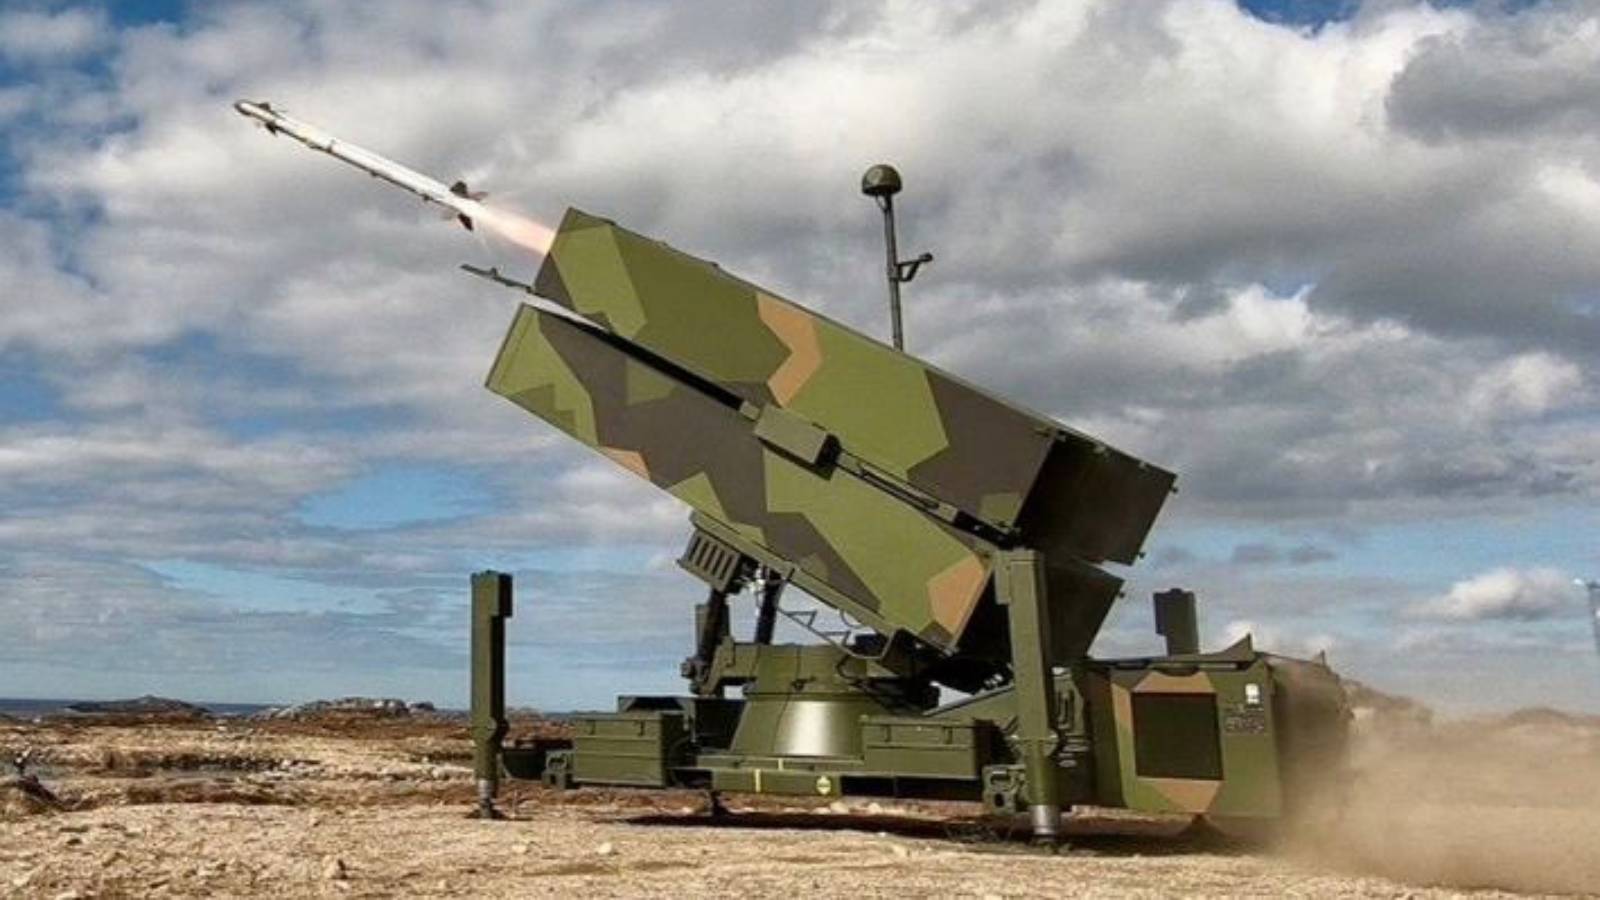 The US will deliver NASAMS air defense systems to Ukraine